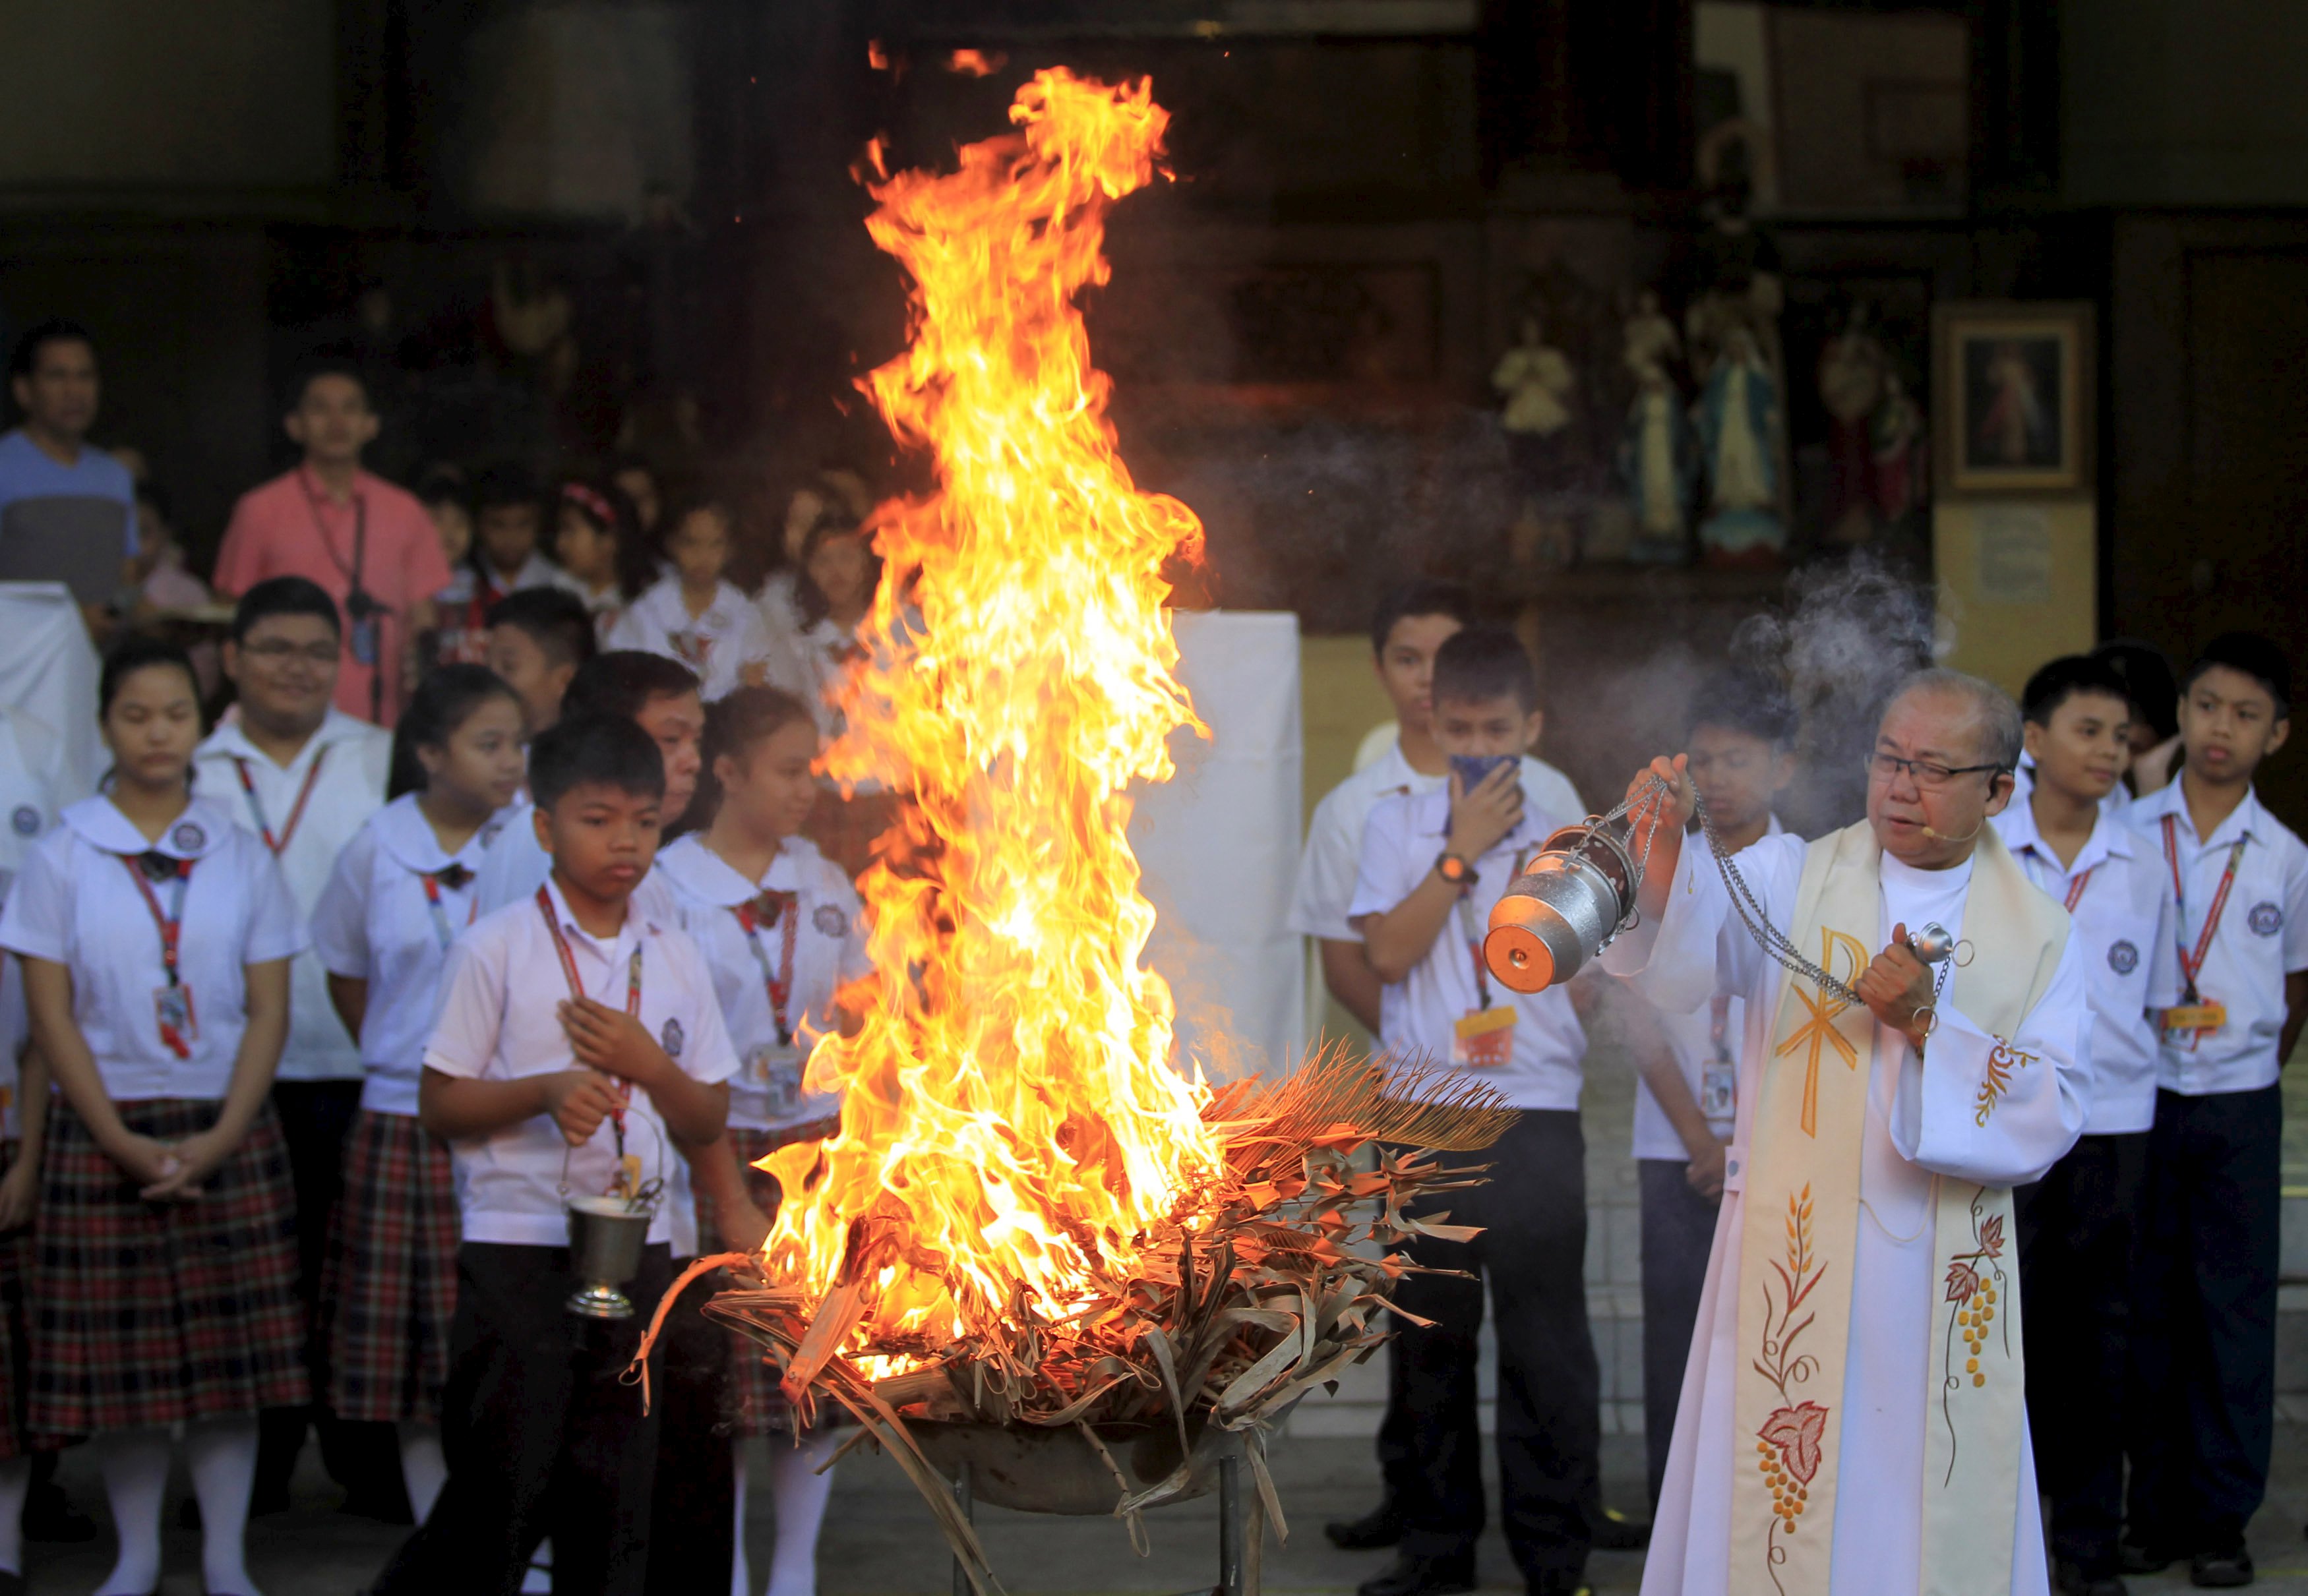 A priest blesses burning dried palm leaves Feb. 9 inside a Catholic school in Manila, Philippines. Ashes from the fire were to be used in Ash Wednesday services the next day, the first day of the penitential season of Lent. (CNS photo/Romeo Ranoco, Reuters)